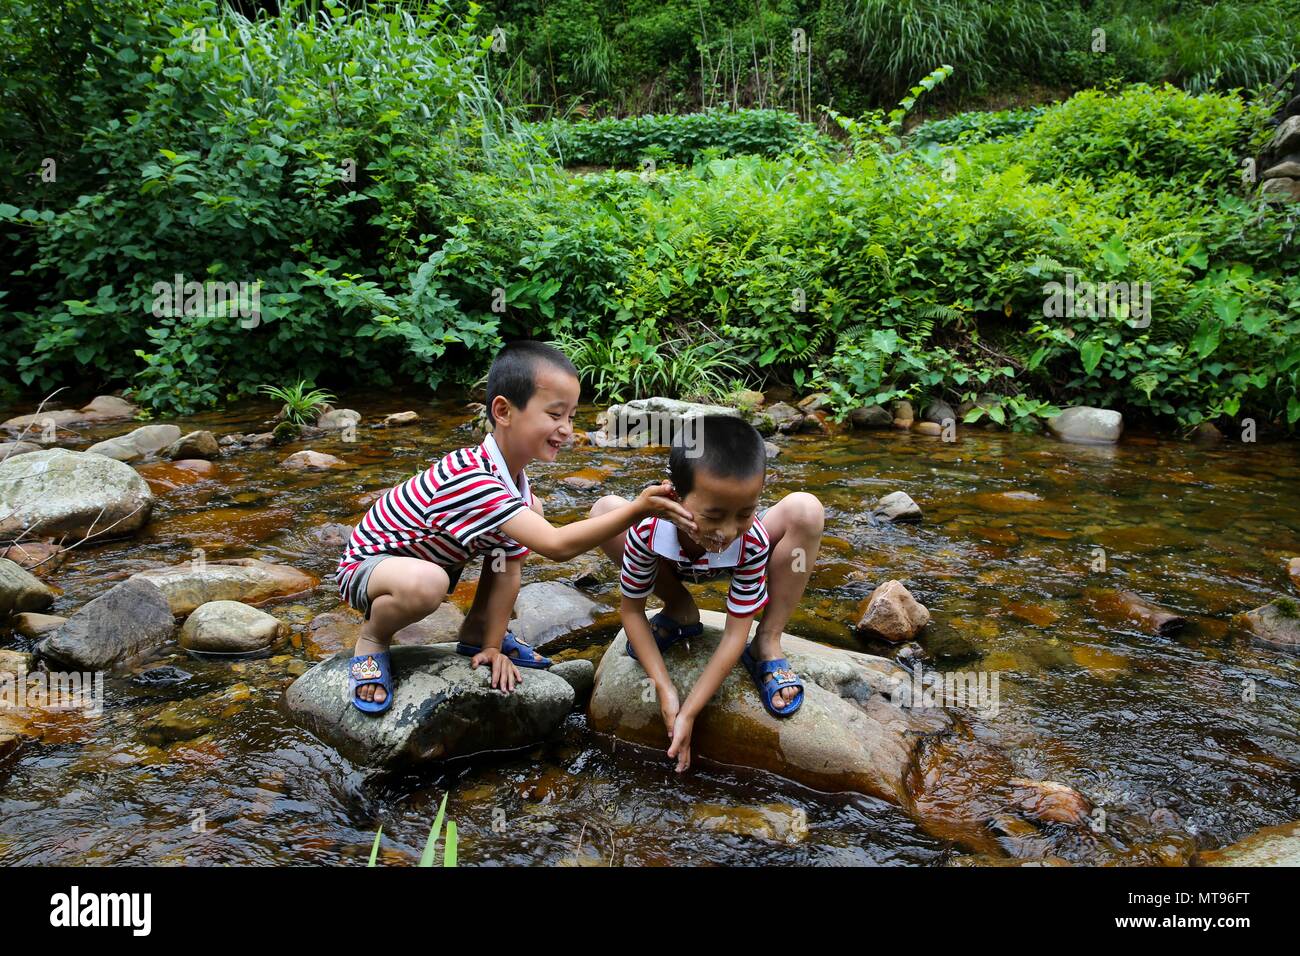 Nanchang, China's Jiangxi Province. 23rd May, 2018. Nine-year-old Huang Guanhao (L) and his twin brother Huang Guanping play by a stream in Suolong Village of Yudu County, east China's Jiangxi Province, May 23, 2018. With about 1,000 residents, Suolong Village has 29 cases of multiple births, a high rate considering the modest population size. Credit: Pan Siwei/Xinhua/Alamy Live News Stock Photo